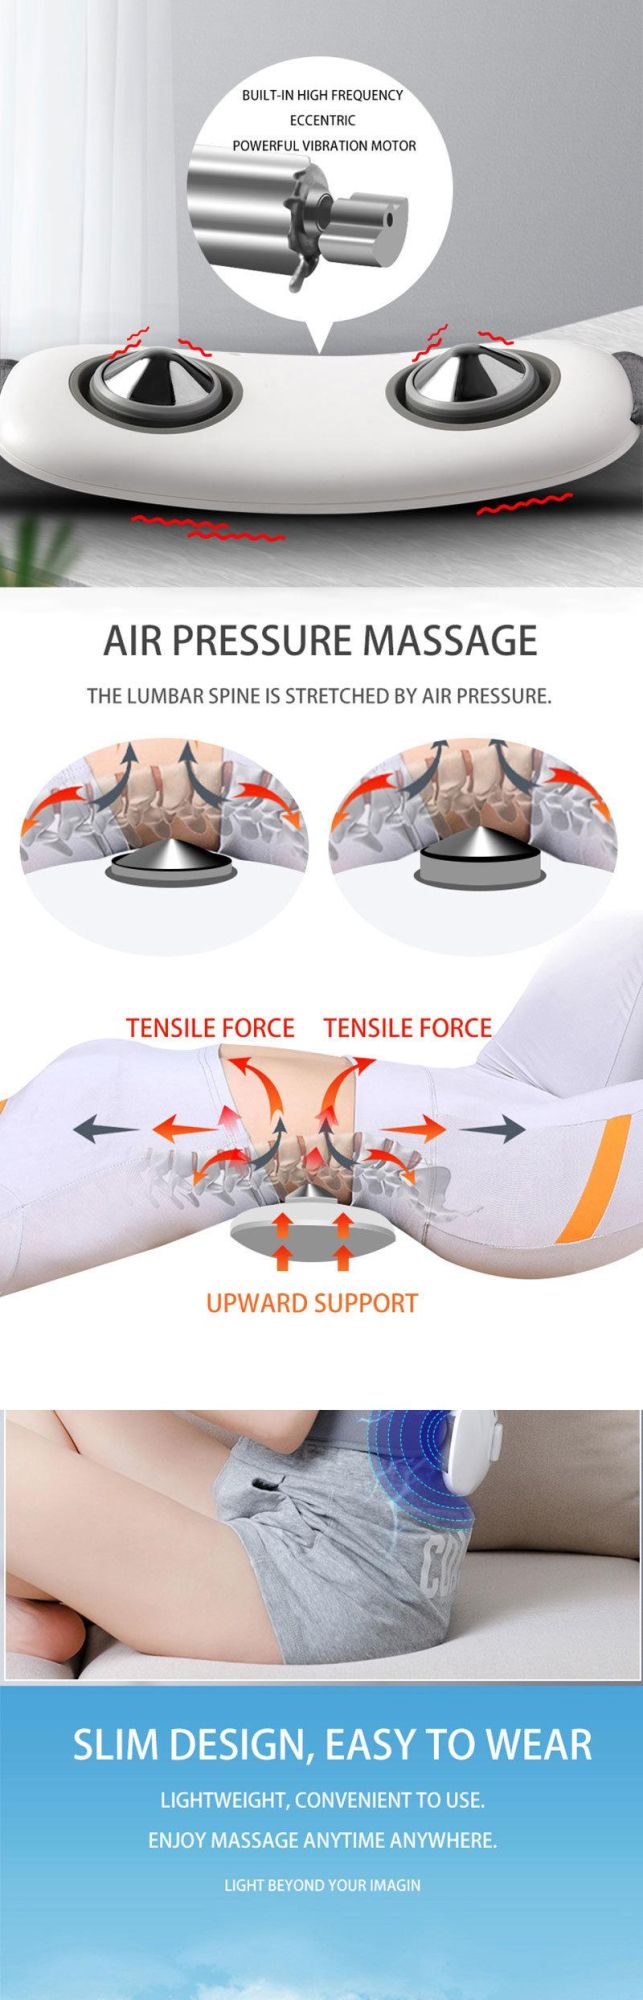 Electric 6 Modes EMS Pulse Therapy Air Pressure Infrared Heating Back Lumbar Waist Massager